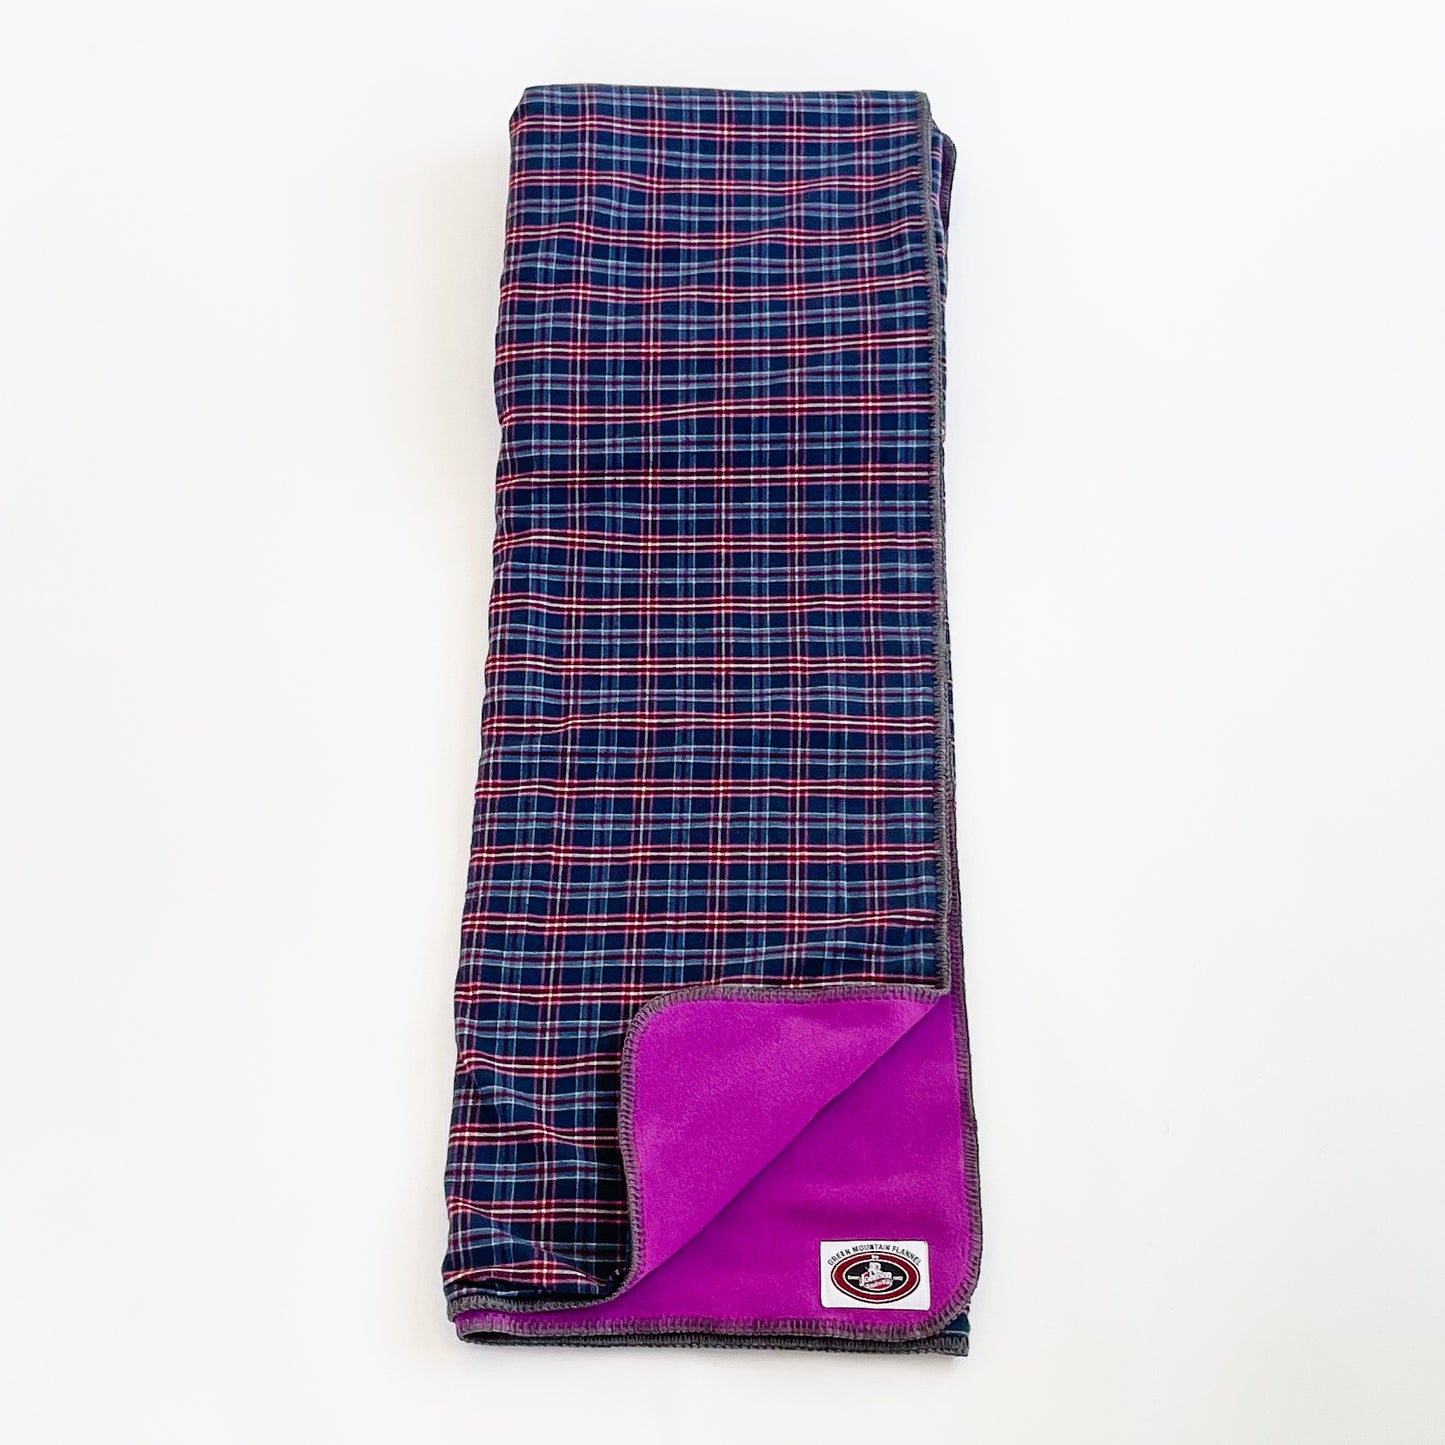 Flannel Throws - Mixed Berry